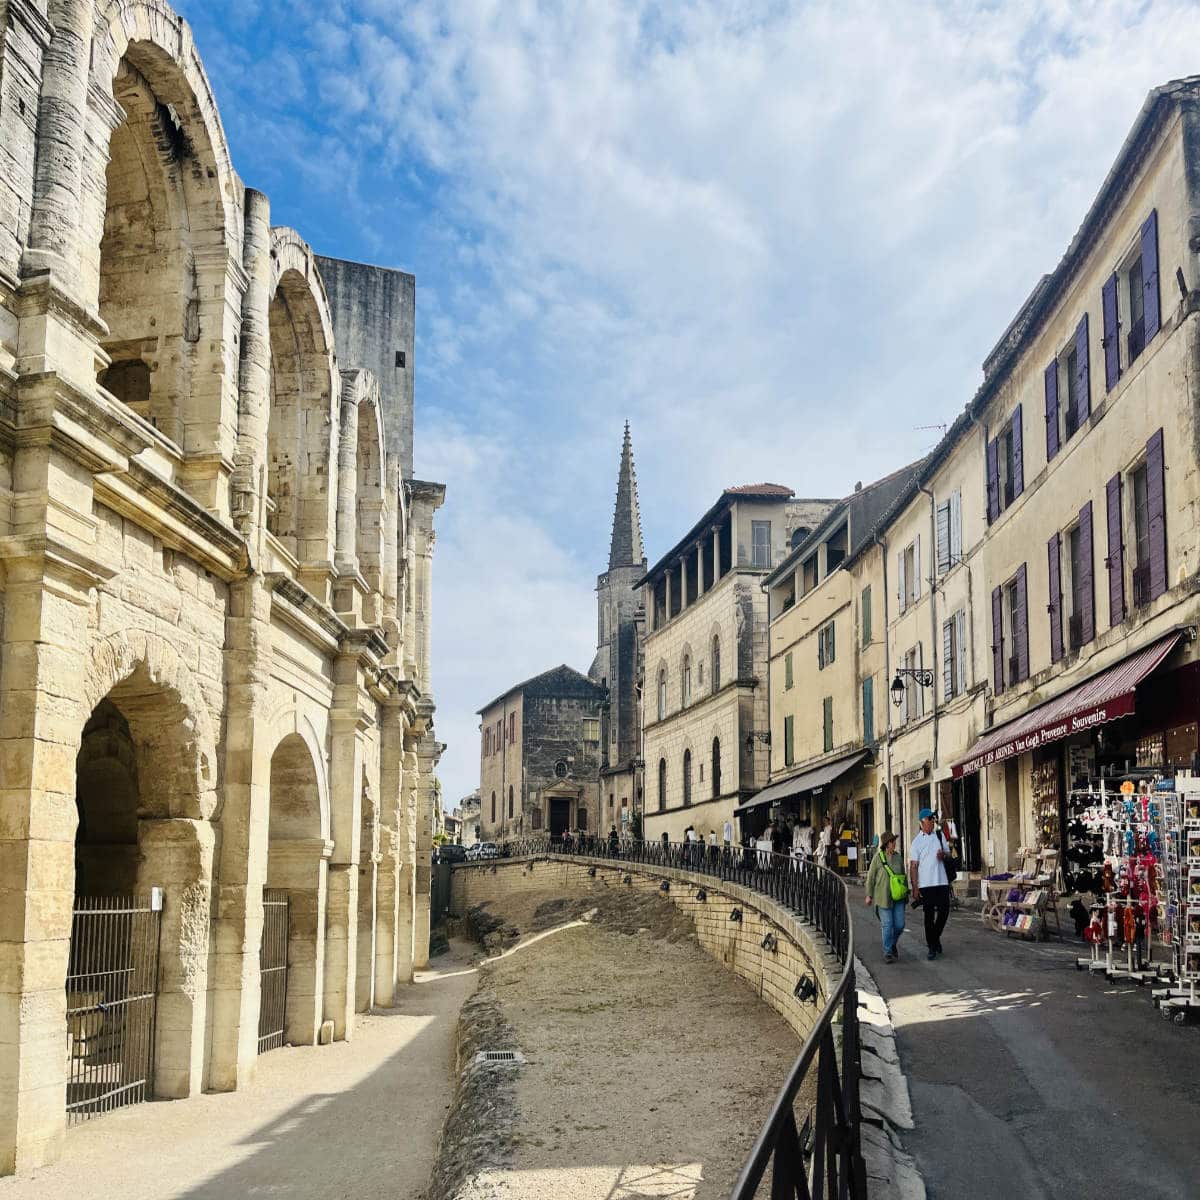 You are currently viewing Arles and its Roman ruins: What to see and do